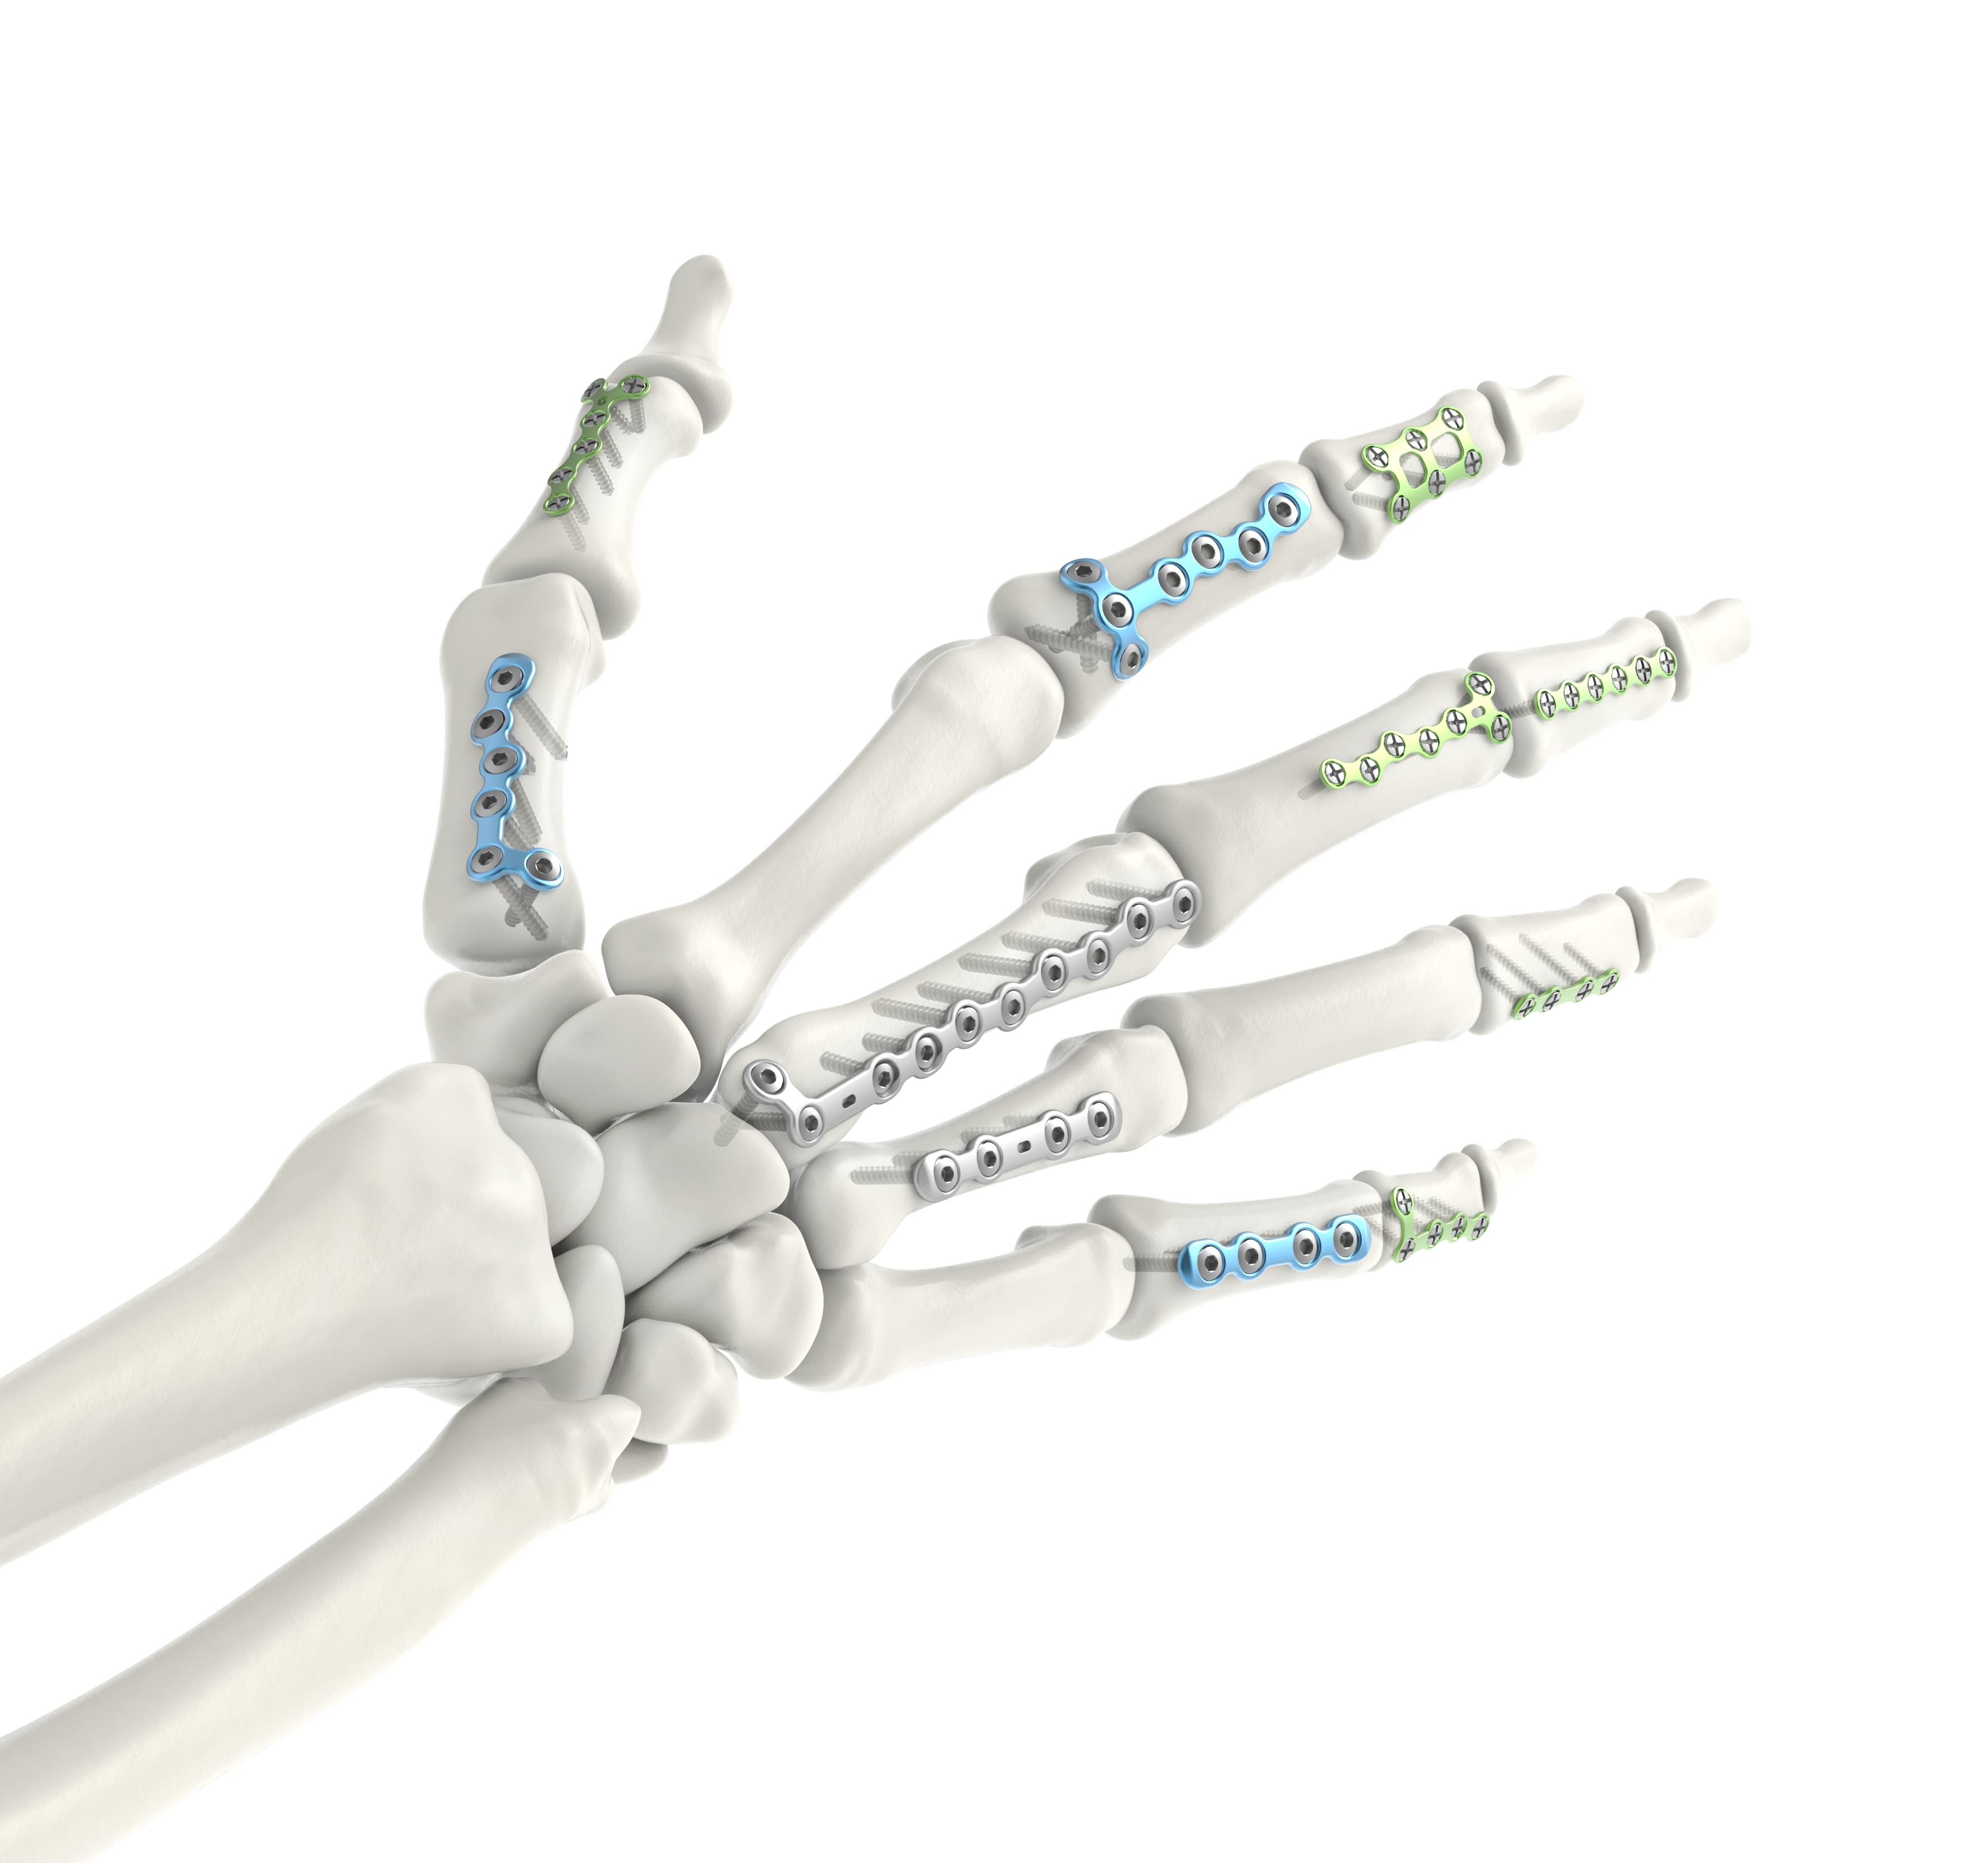 Hand Fracture Fixation Plating System